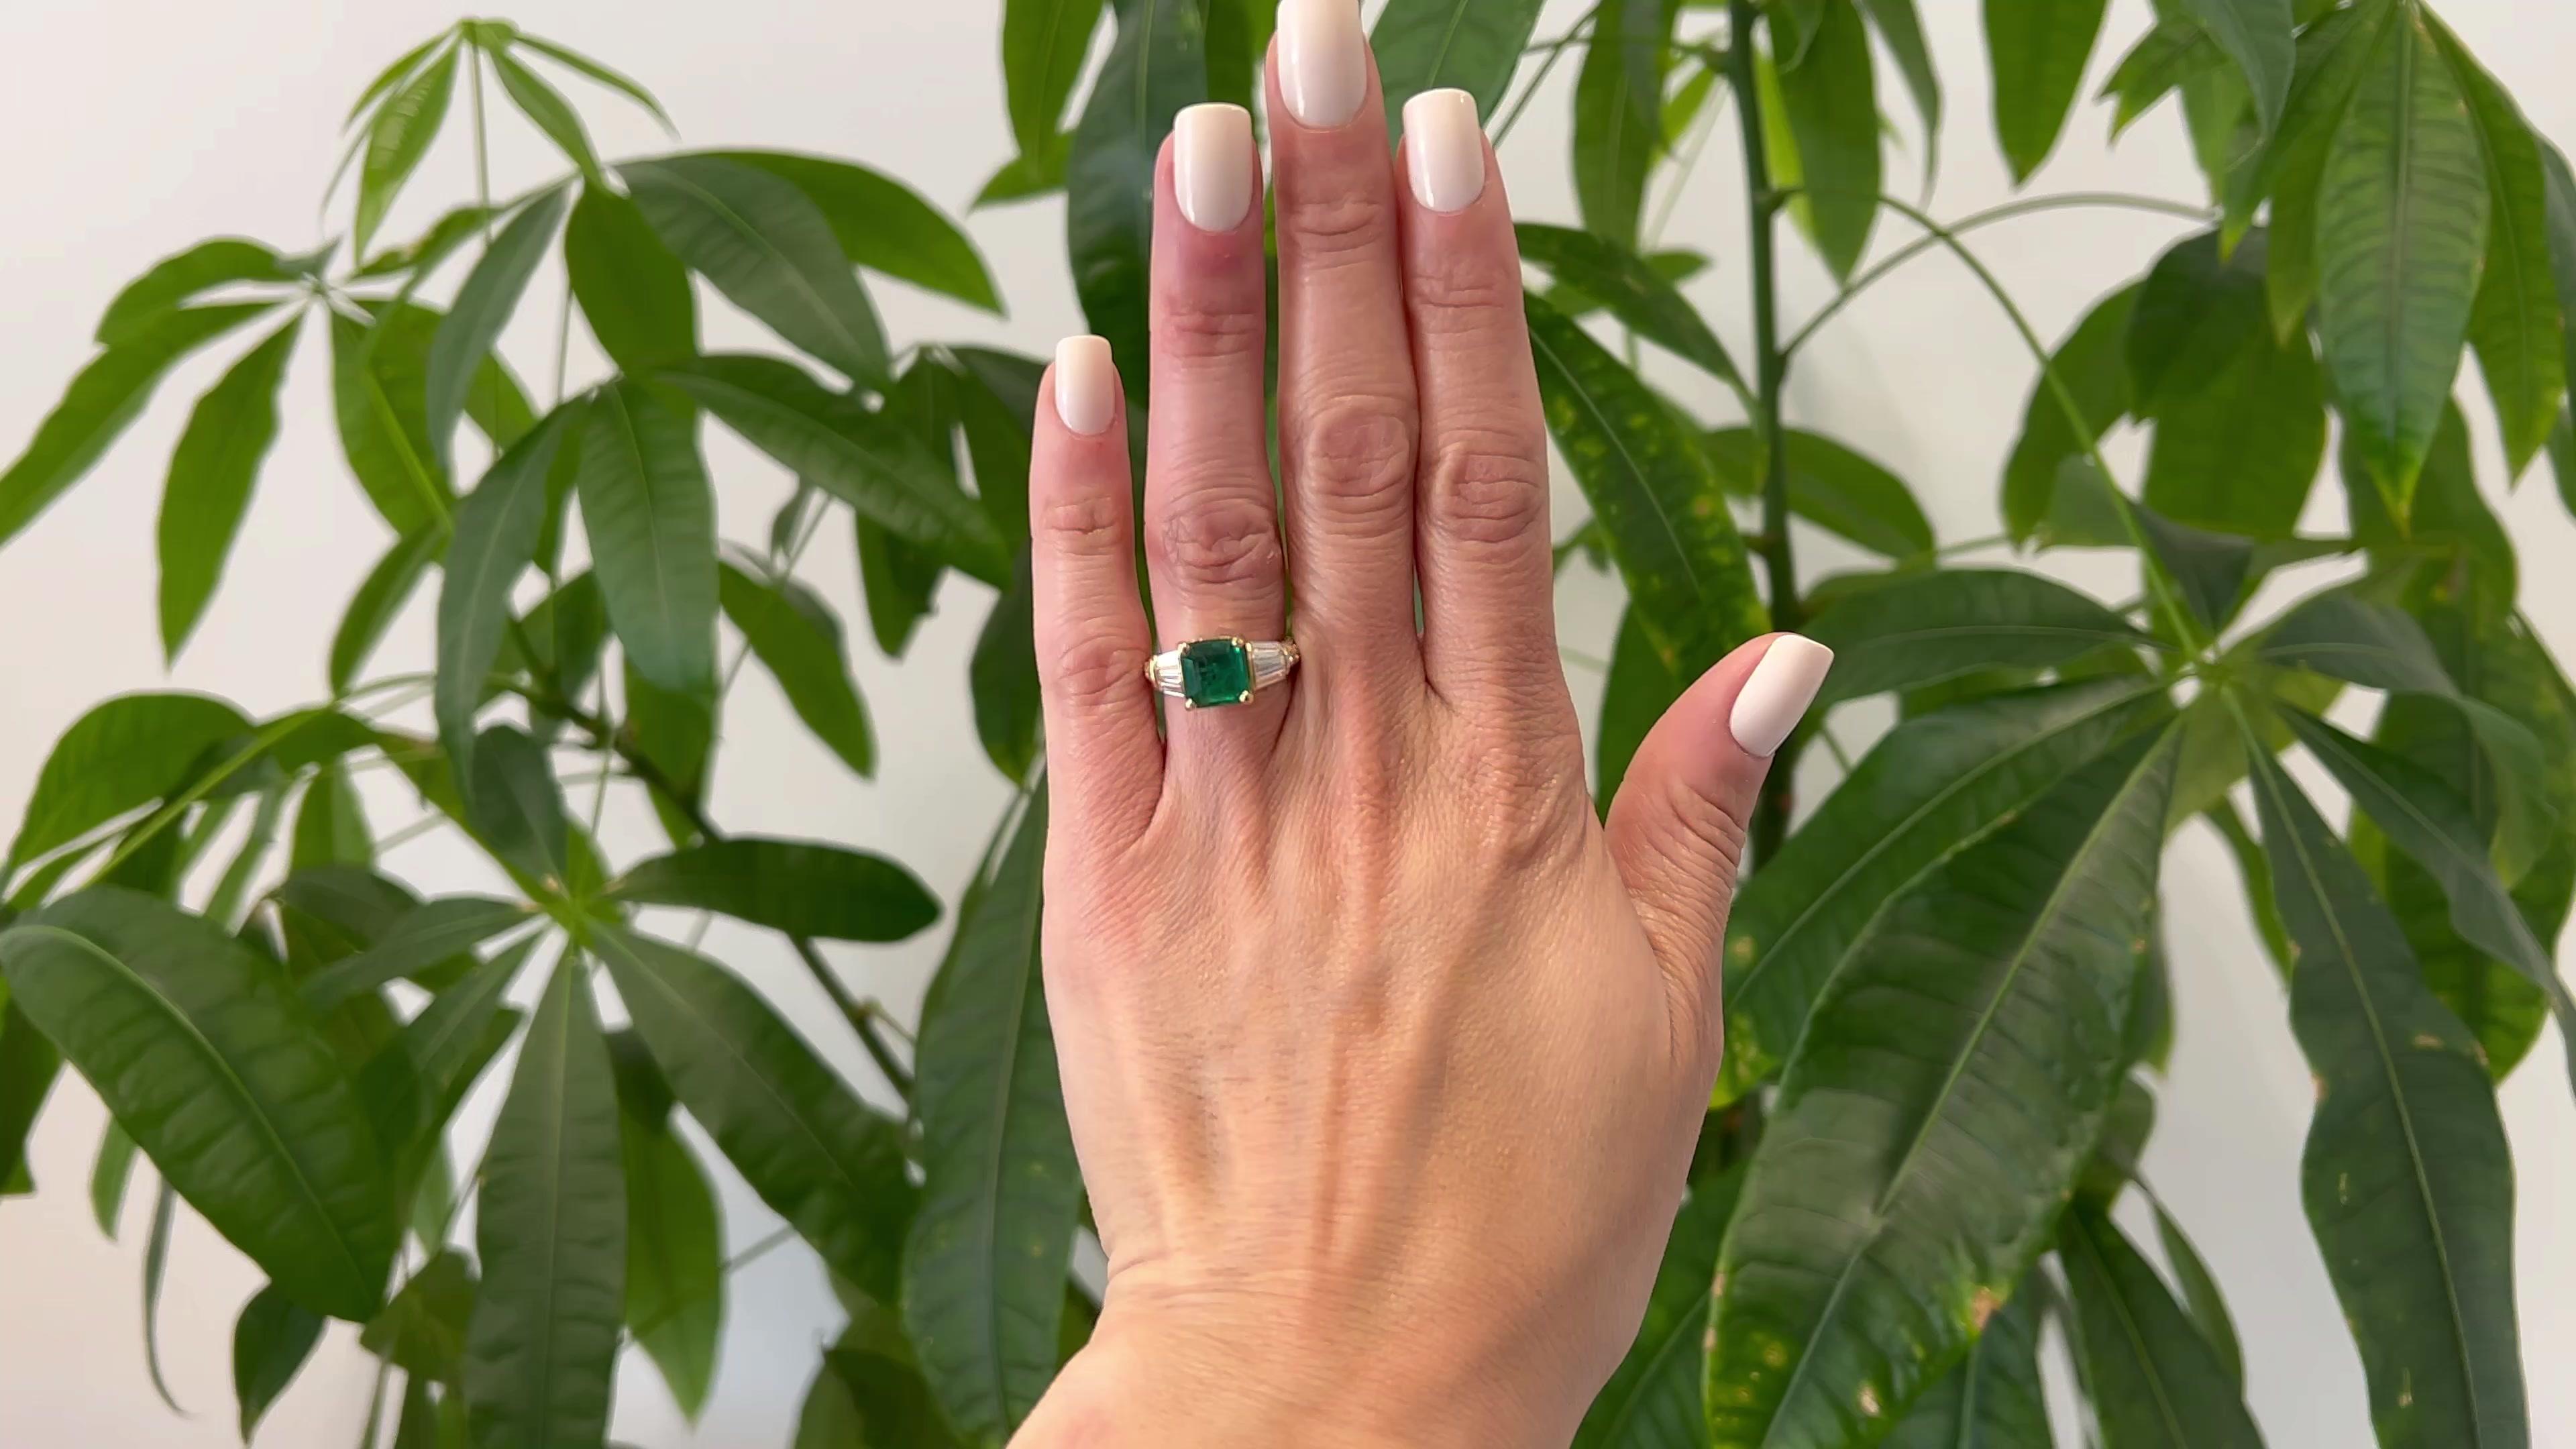 One Vintage GIA Zambian Emerald and Diamond 18K Yellow Gold Ring. Featuring one GIA octagonal step cut emerald weighing 3.61 carats, accompanied with GIA #2235012352 stating the emerald is of Zambian origin. Accented by six tapered baguette cut